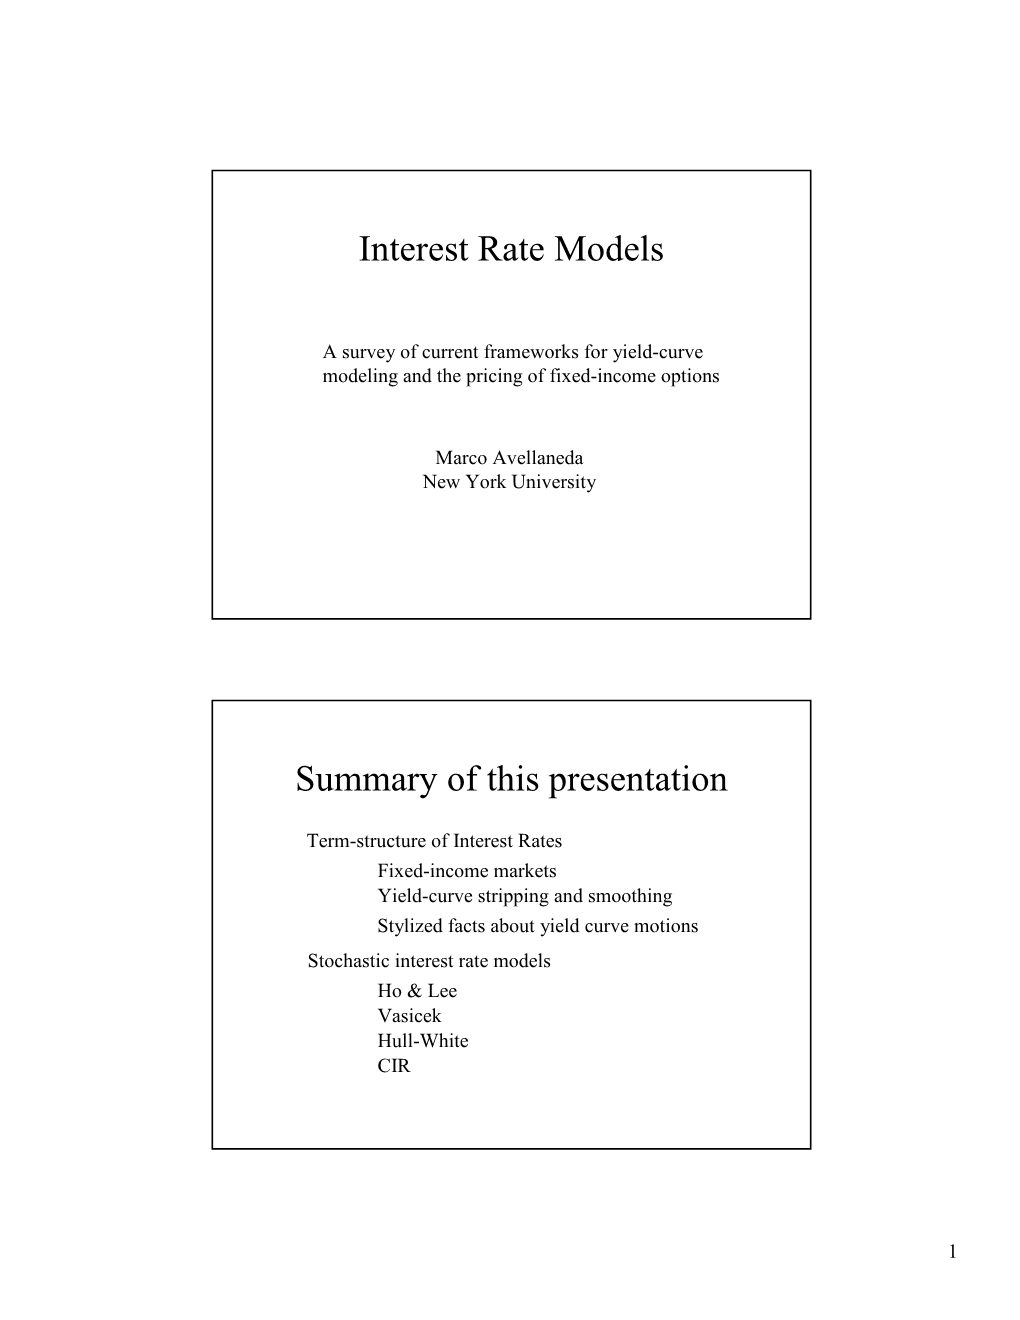 Interest Rate Models Summary of This Presentation